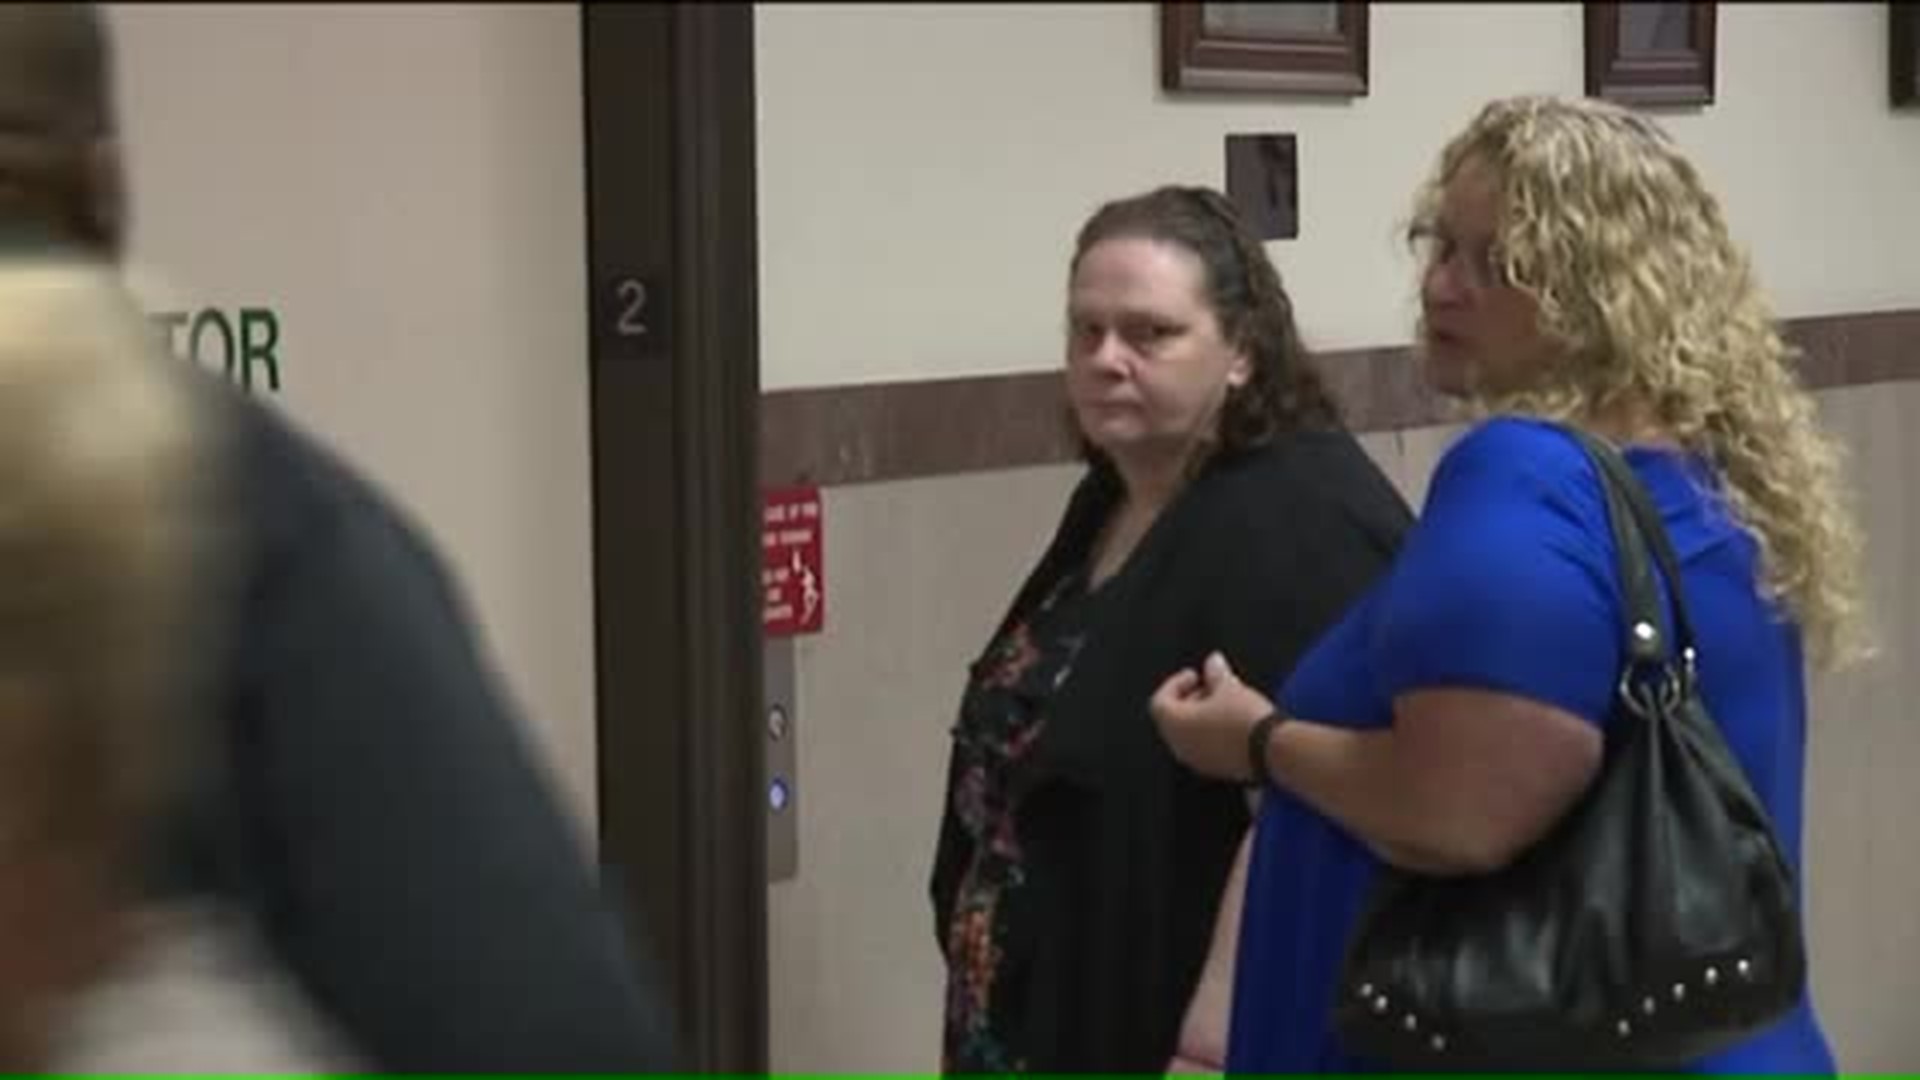 Woman on trial for killing baby in 2016